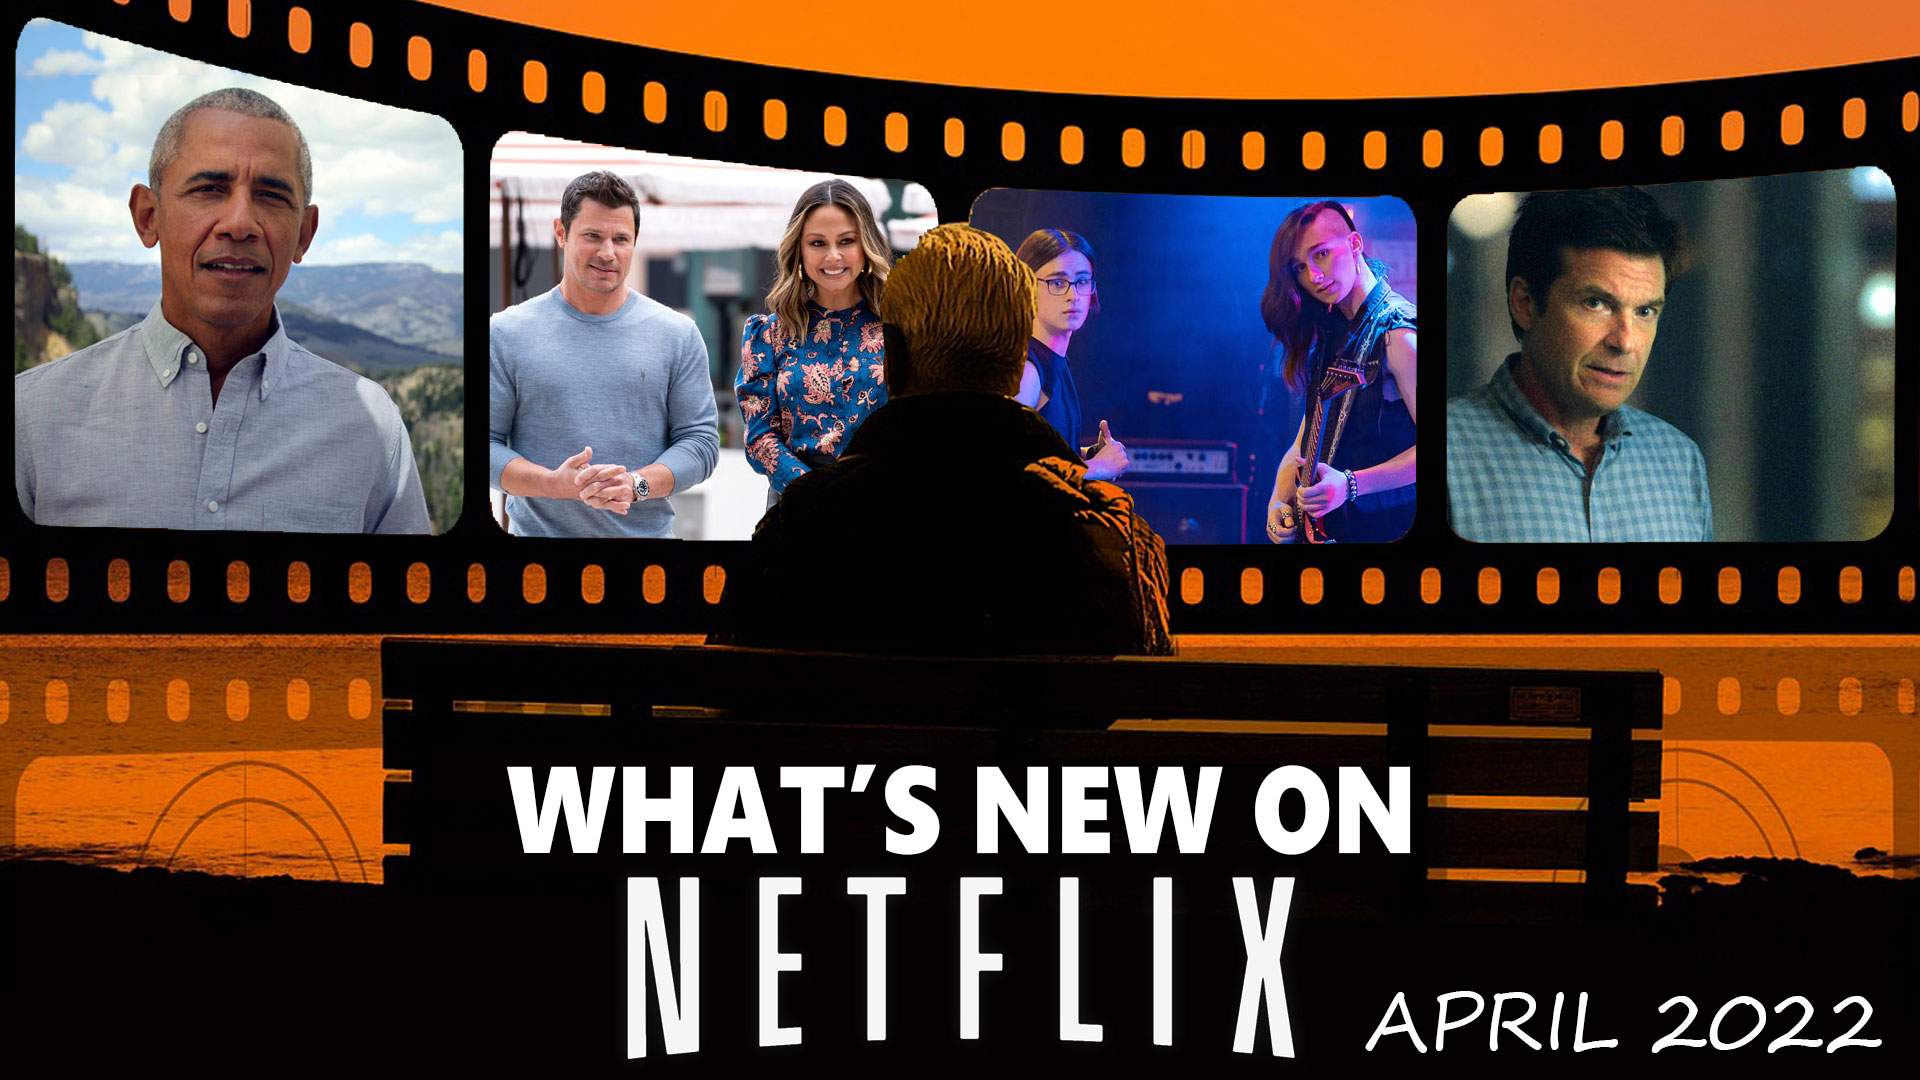 What's New on Netflix April 2022